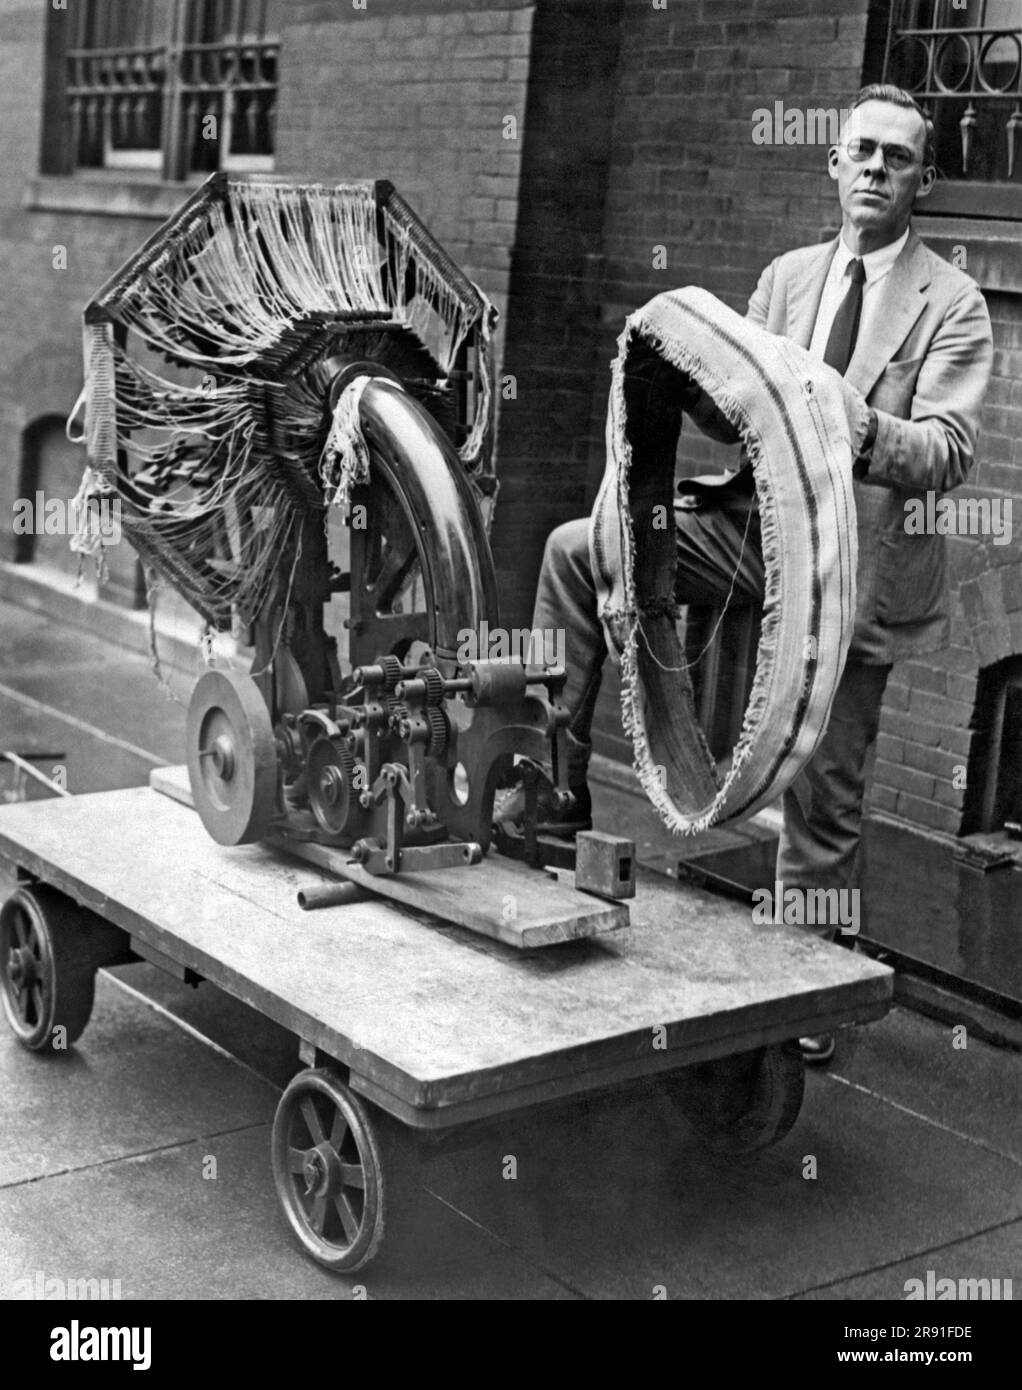 Washington, D.C.:  August 21, 1925. A Smithsonian Institute official holding the portable tire making device that was presented to them today. He's standing with the fabric weaving loom machine, and the second machine, which is not shown, constructs a three ply rubberized fabric. This machine makes it possible to set up small auto tire factories anywhere that's desired. Stock Photo